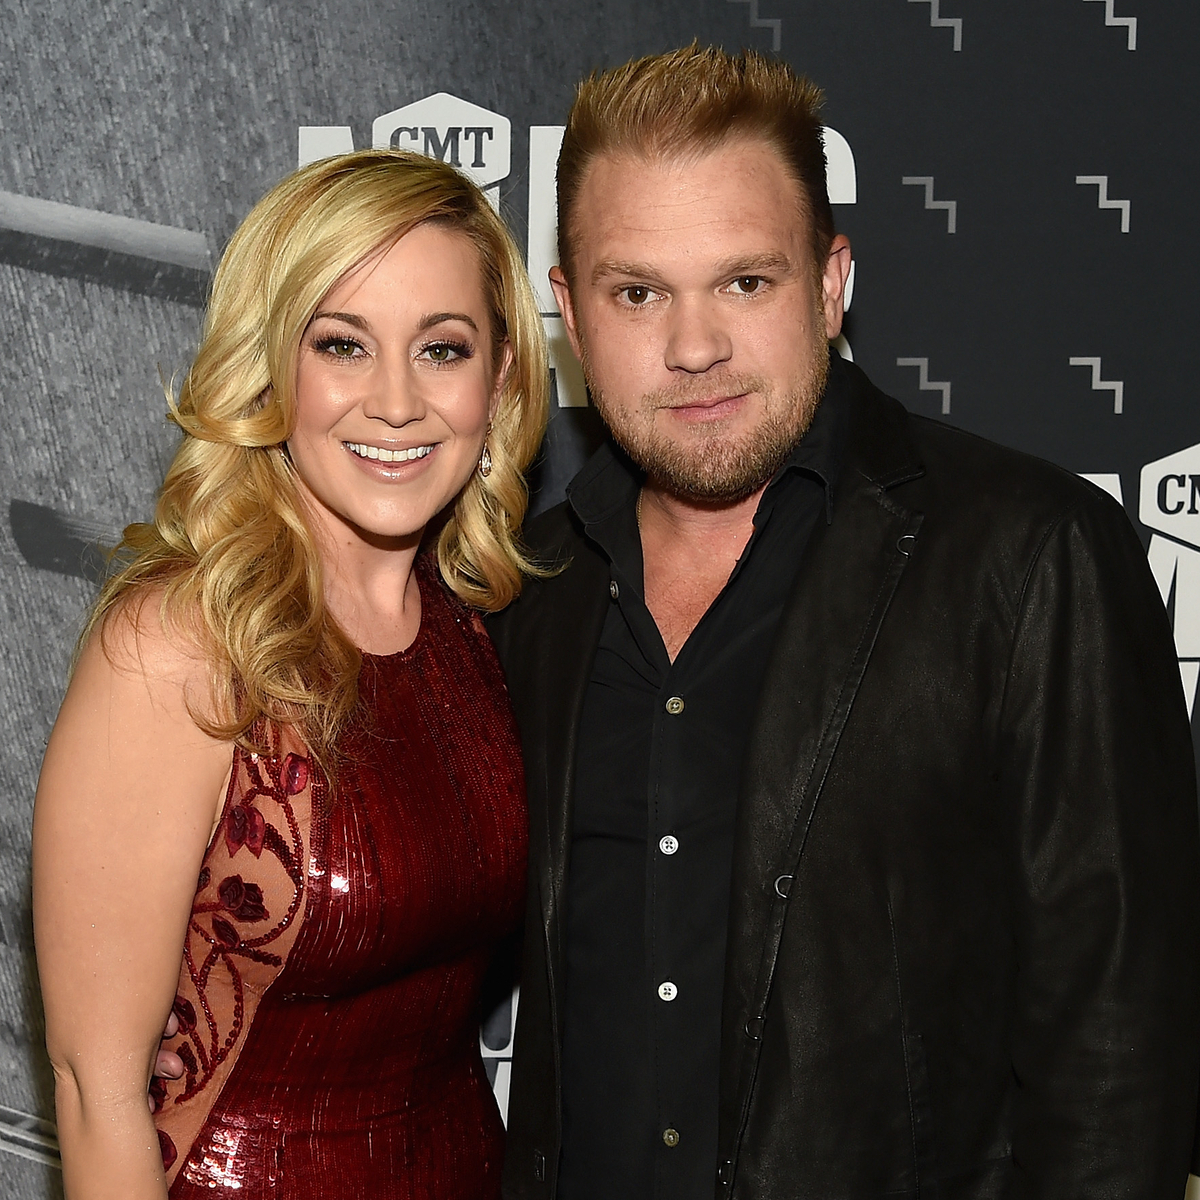 Kellie Pickler’s Late Husband Kyle Jacobs Honored at Family Memorial